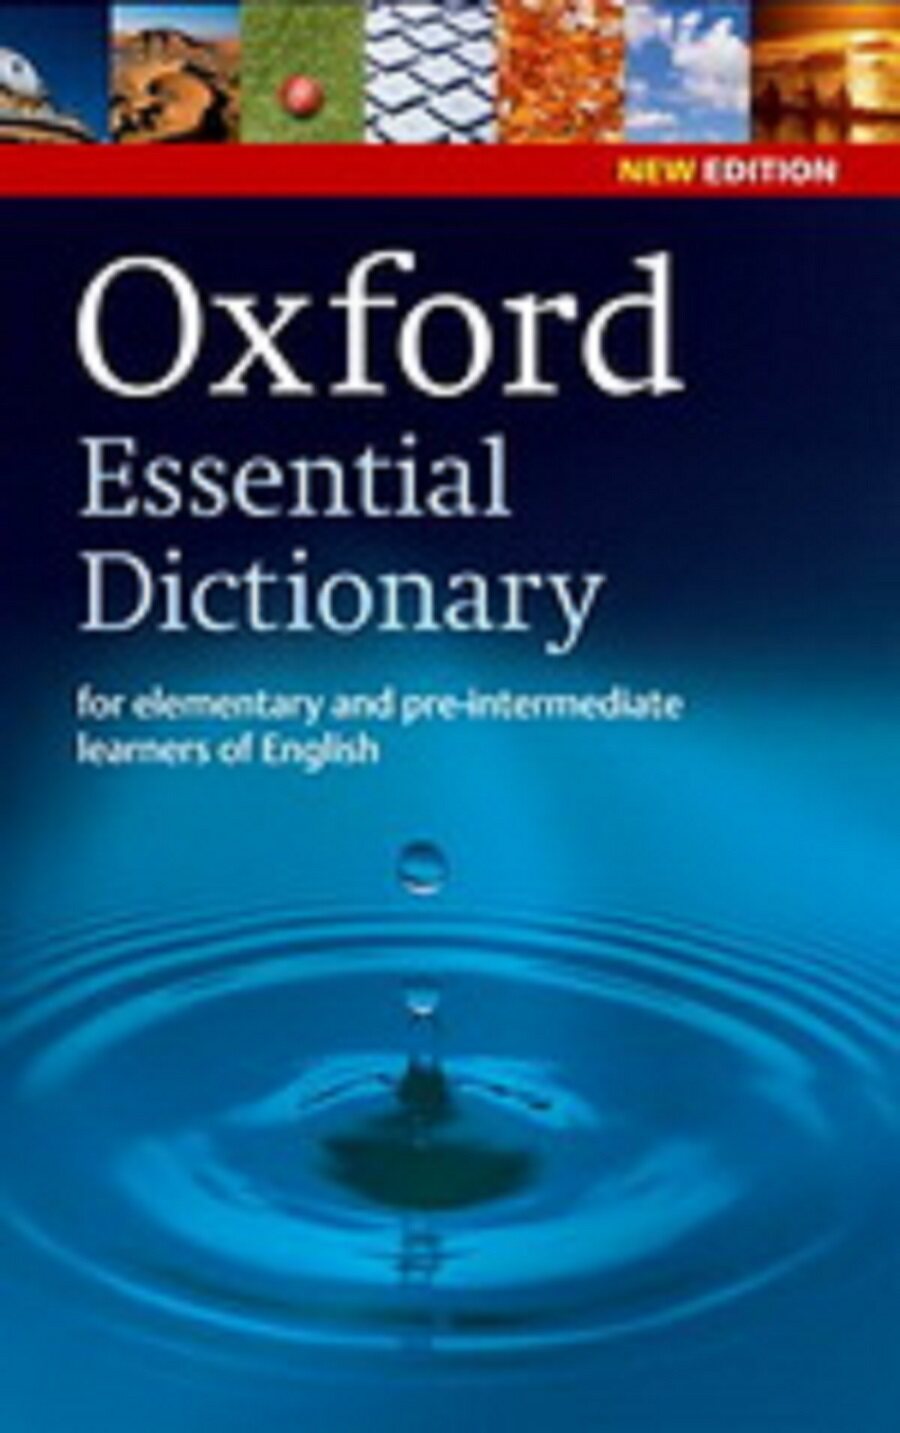 OXFORD ESSENTIAL DICTIONARY (2ED) by DK TODAY